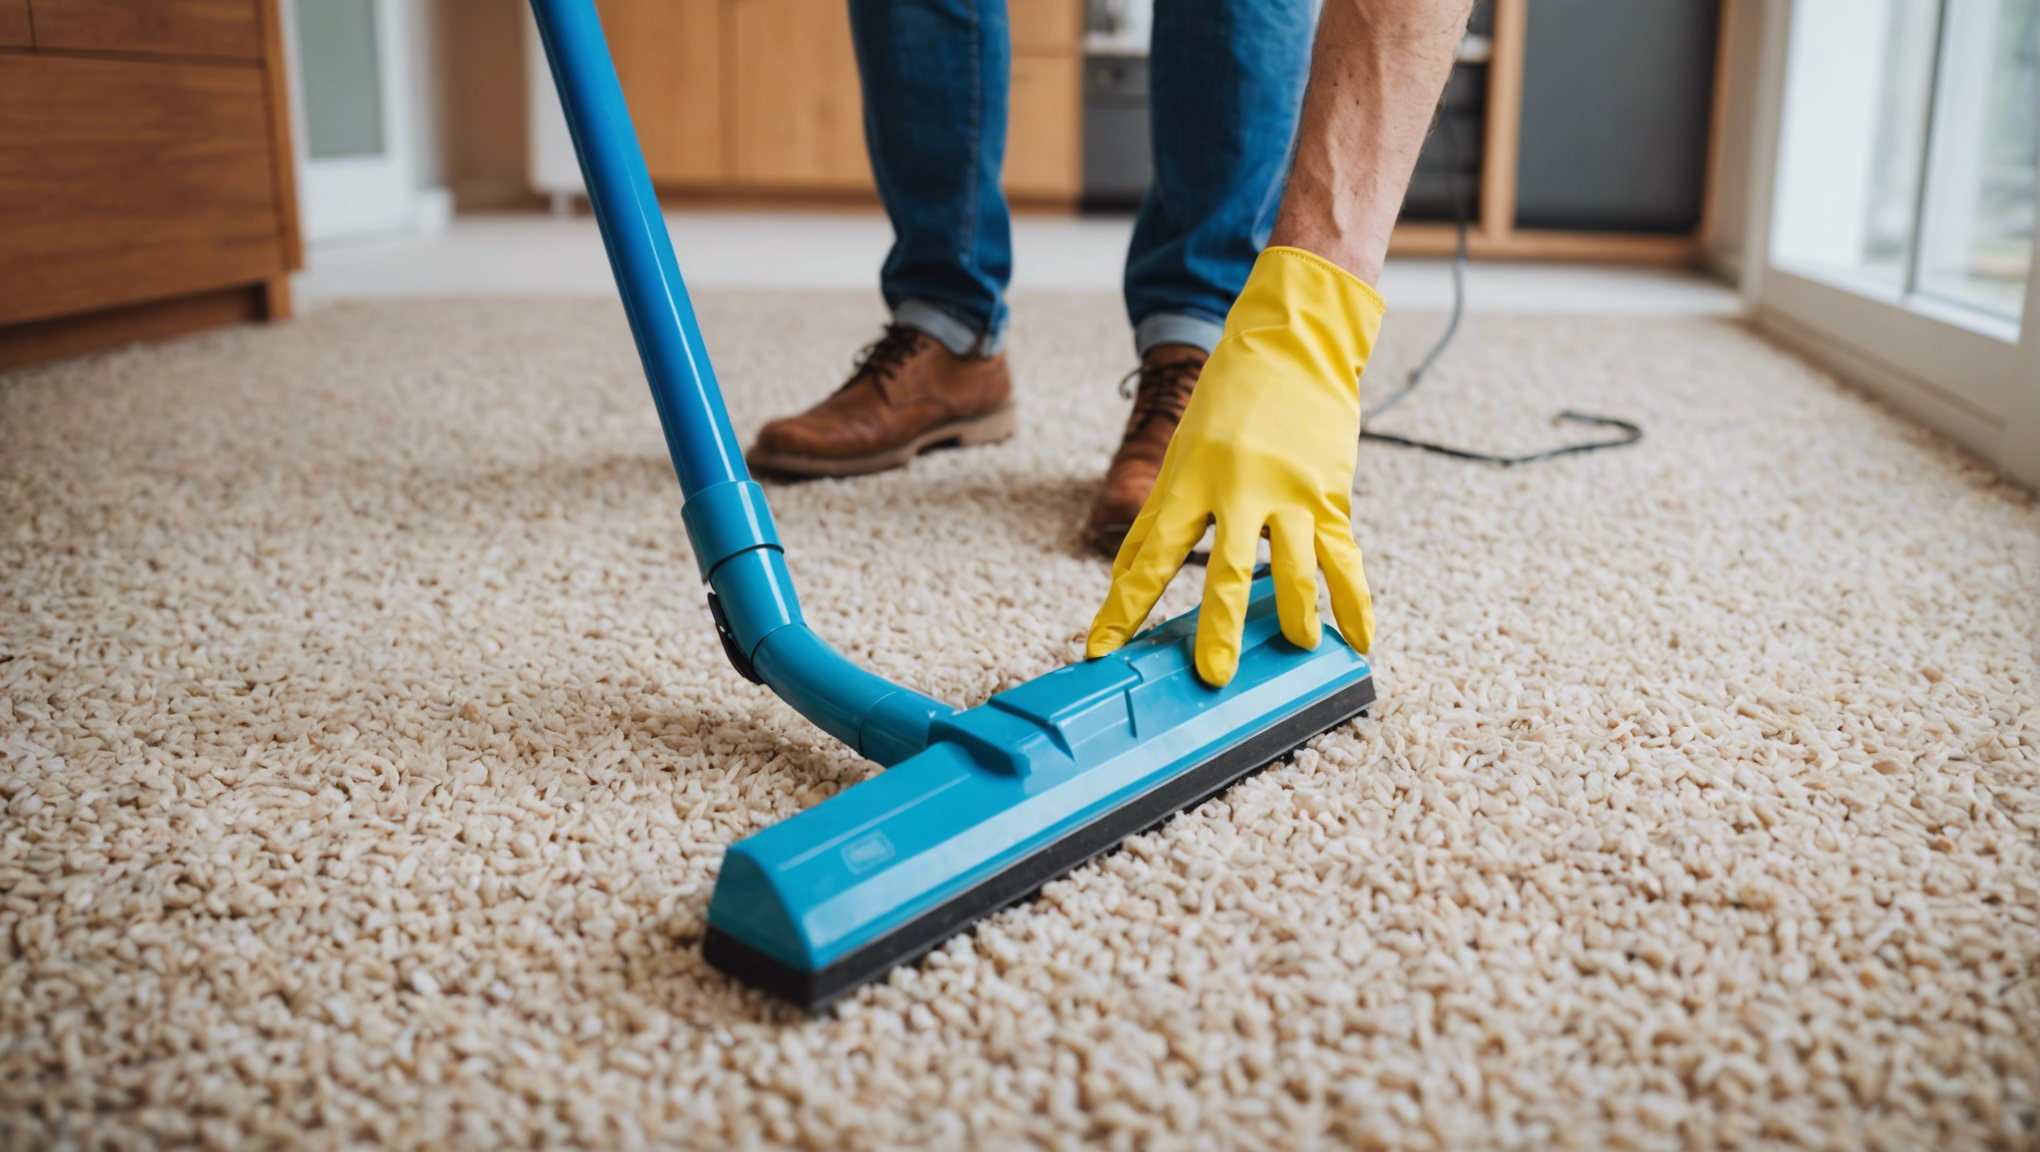 learn expert tips to keep pests away during spring cleaning with our top 10 tips and keep your home pest-free this season.